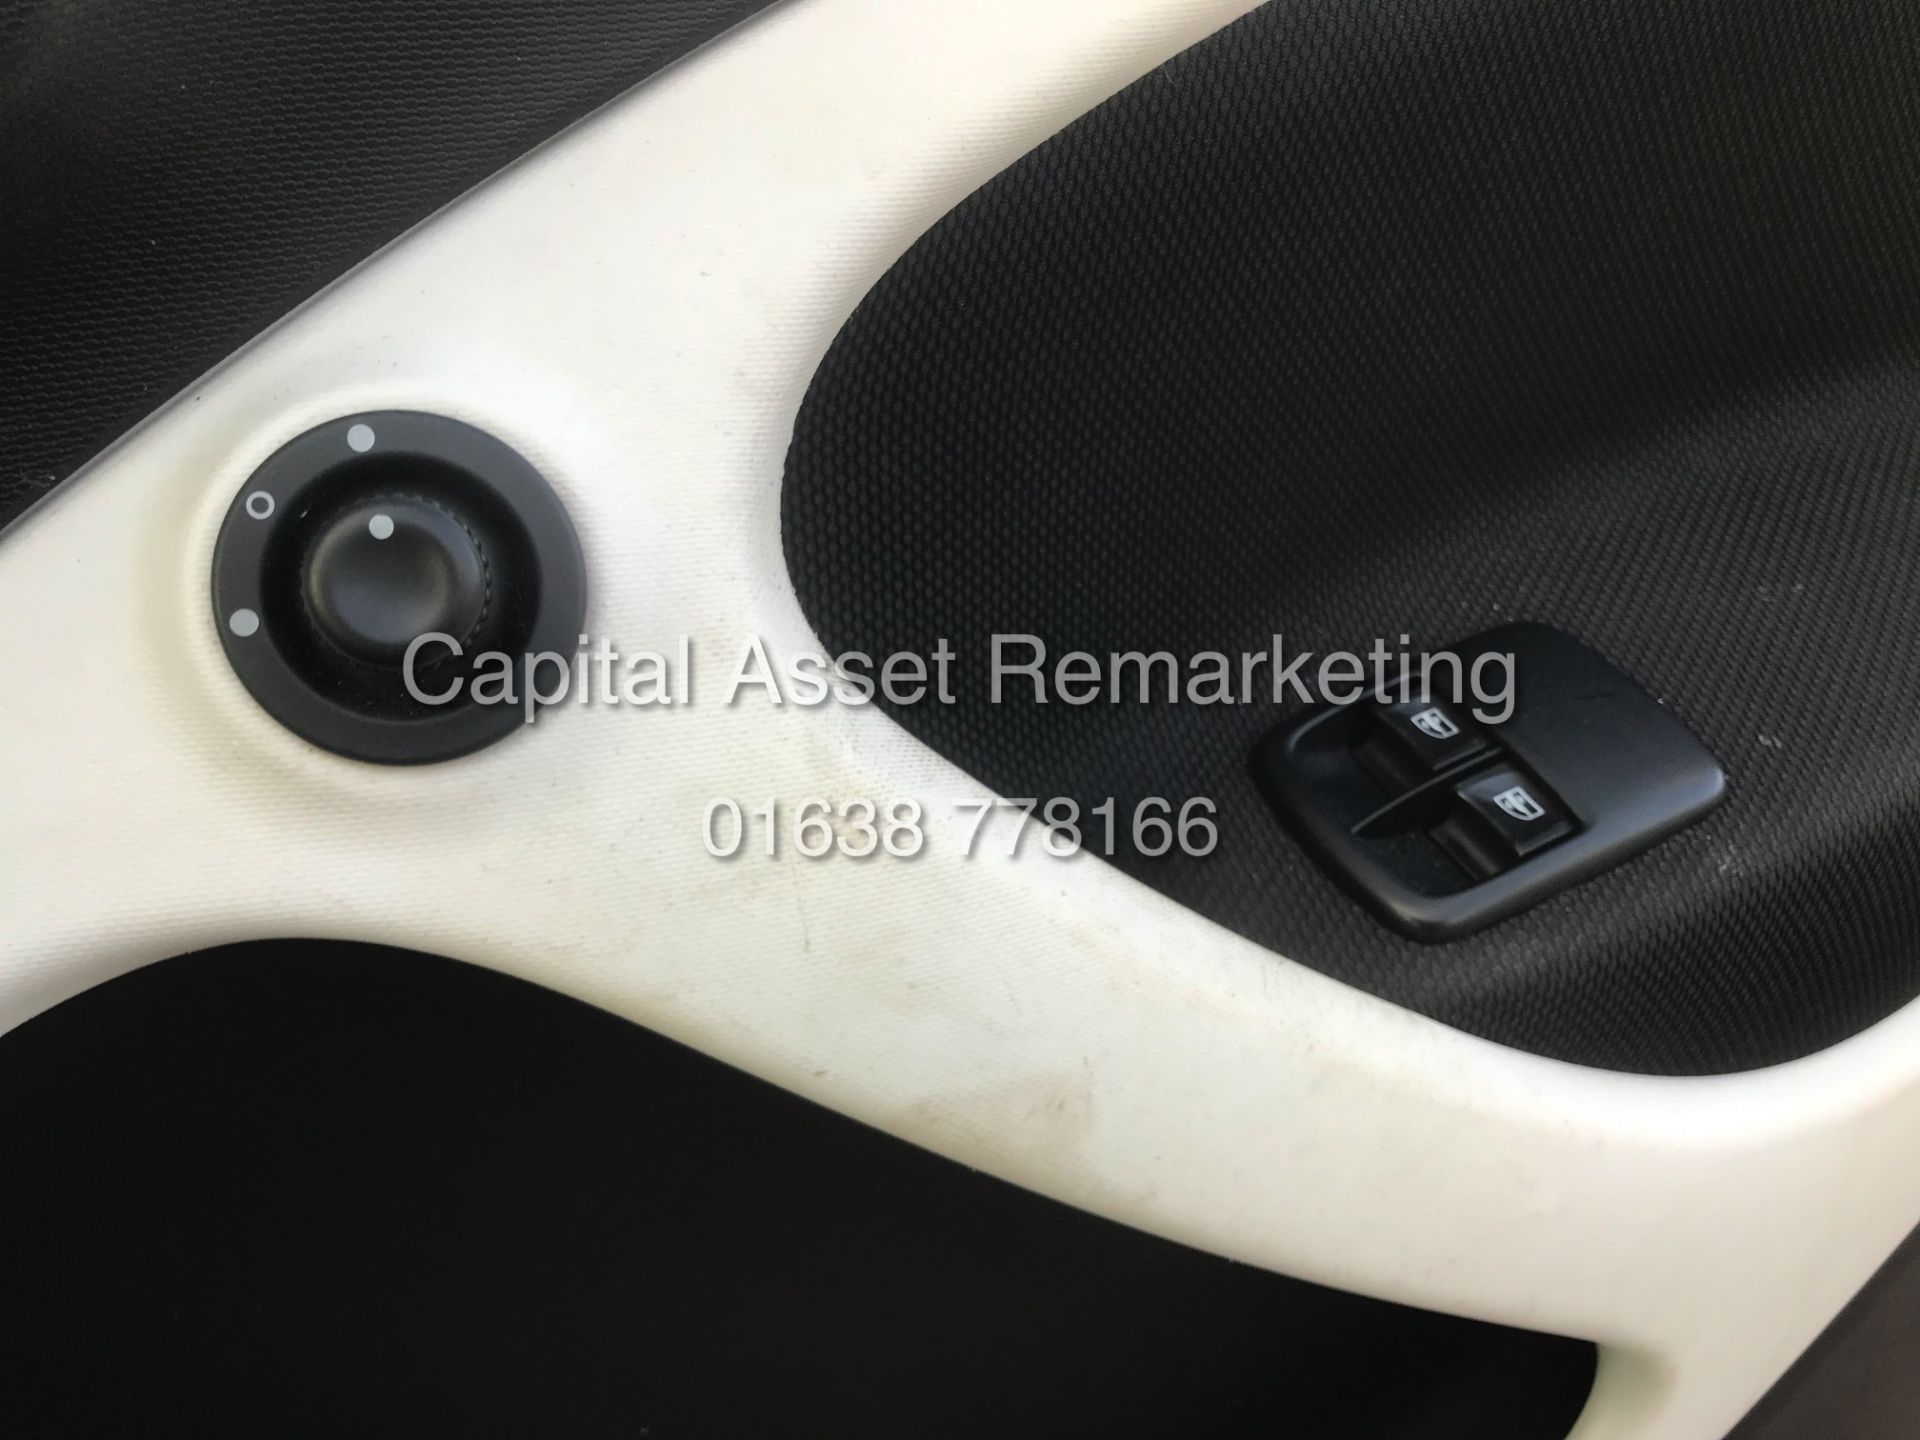 On Sale MERCEDES SMART FORFOUR "PRIME PREMIUM" 5 DR (15 REG - NEW) ONLY 30,000 miles - FULL LEATHER - Image 10 of 16